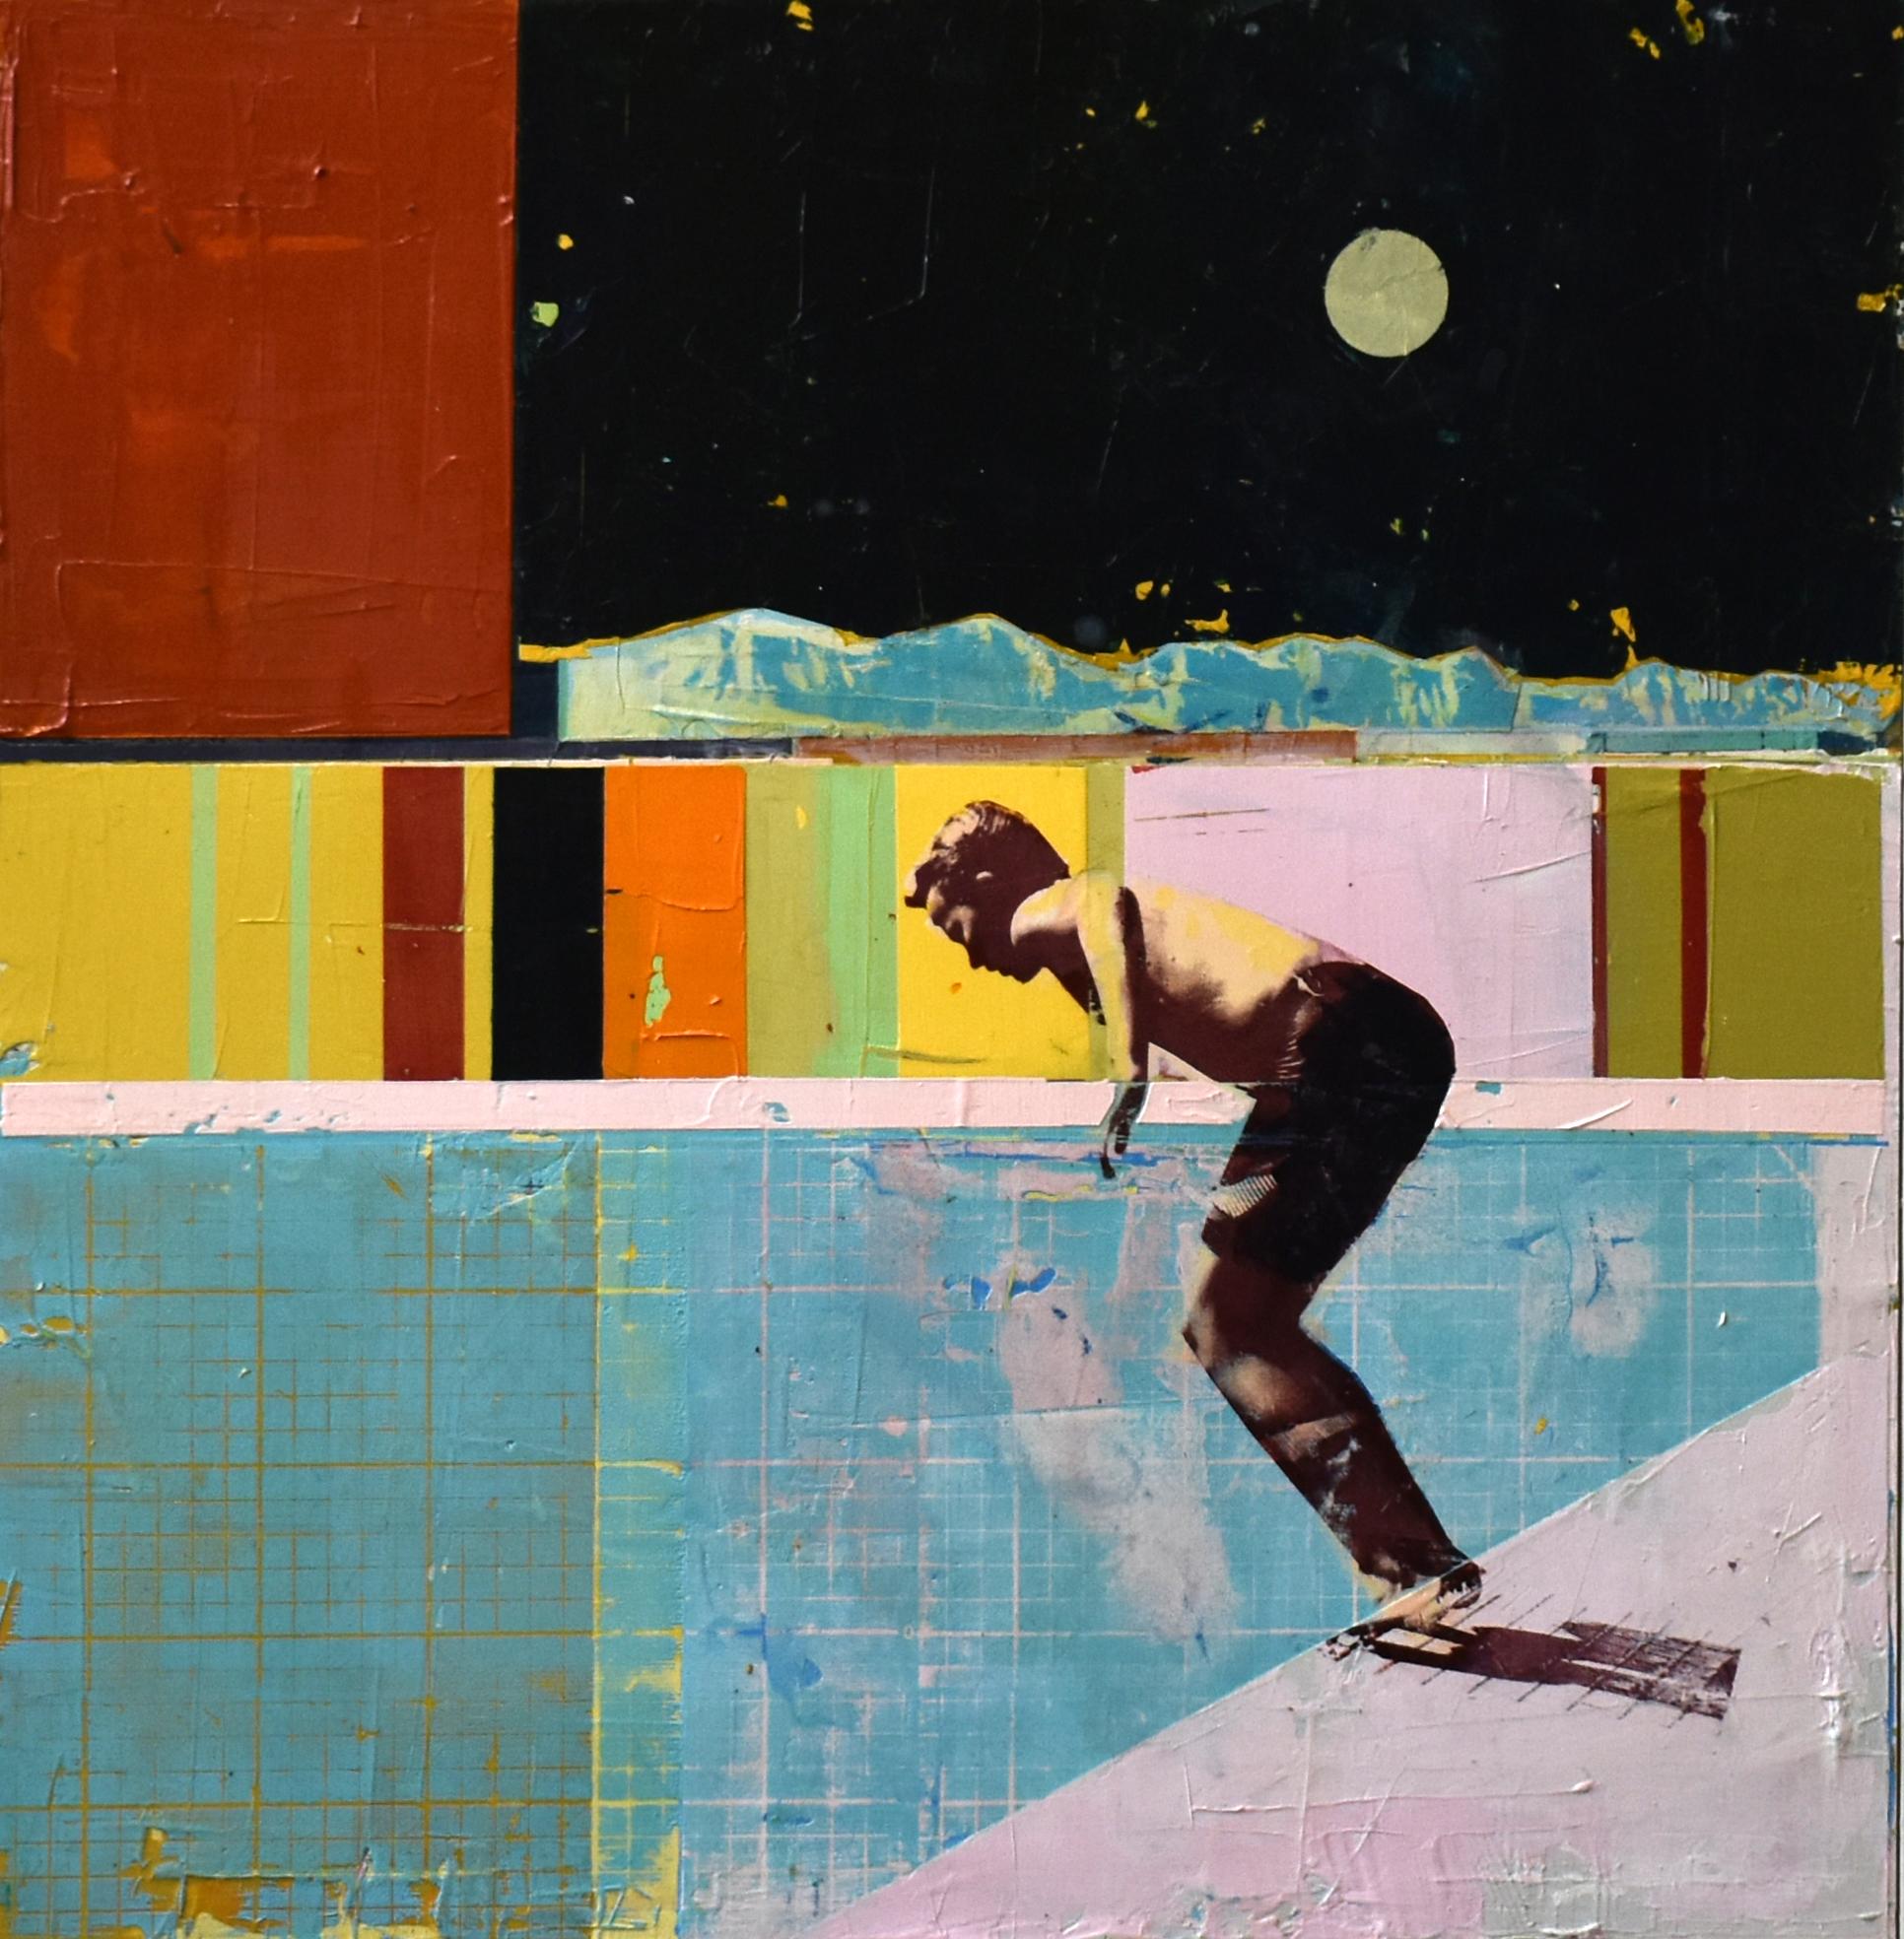 Dan Parry-Jones Figurative Painting - "Skater with Night Sky" Acrylic and mixed media on board, white float frame 